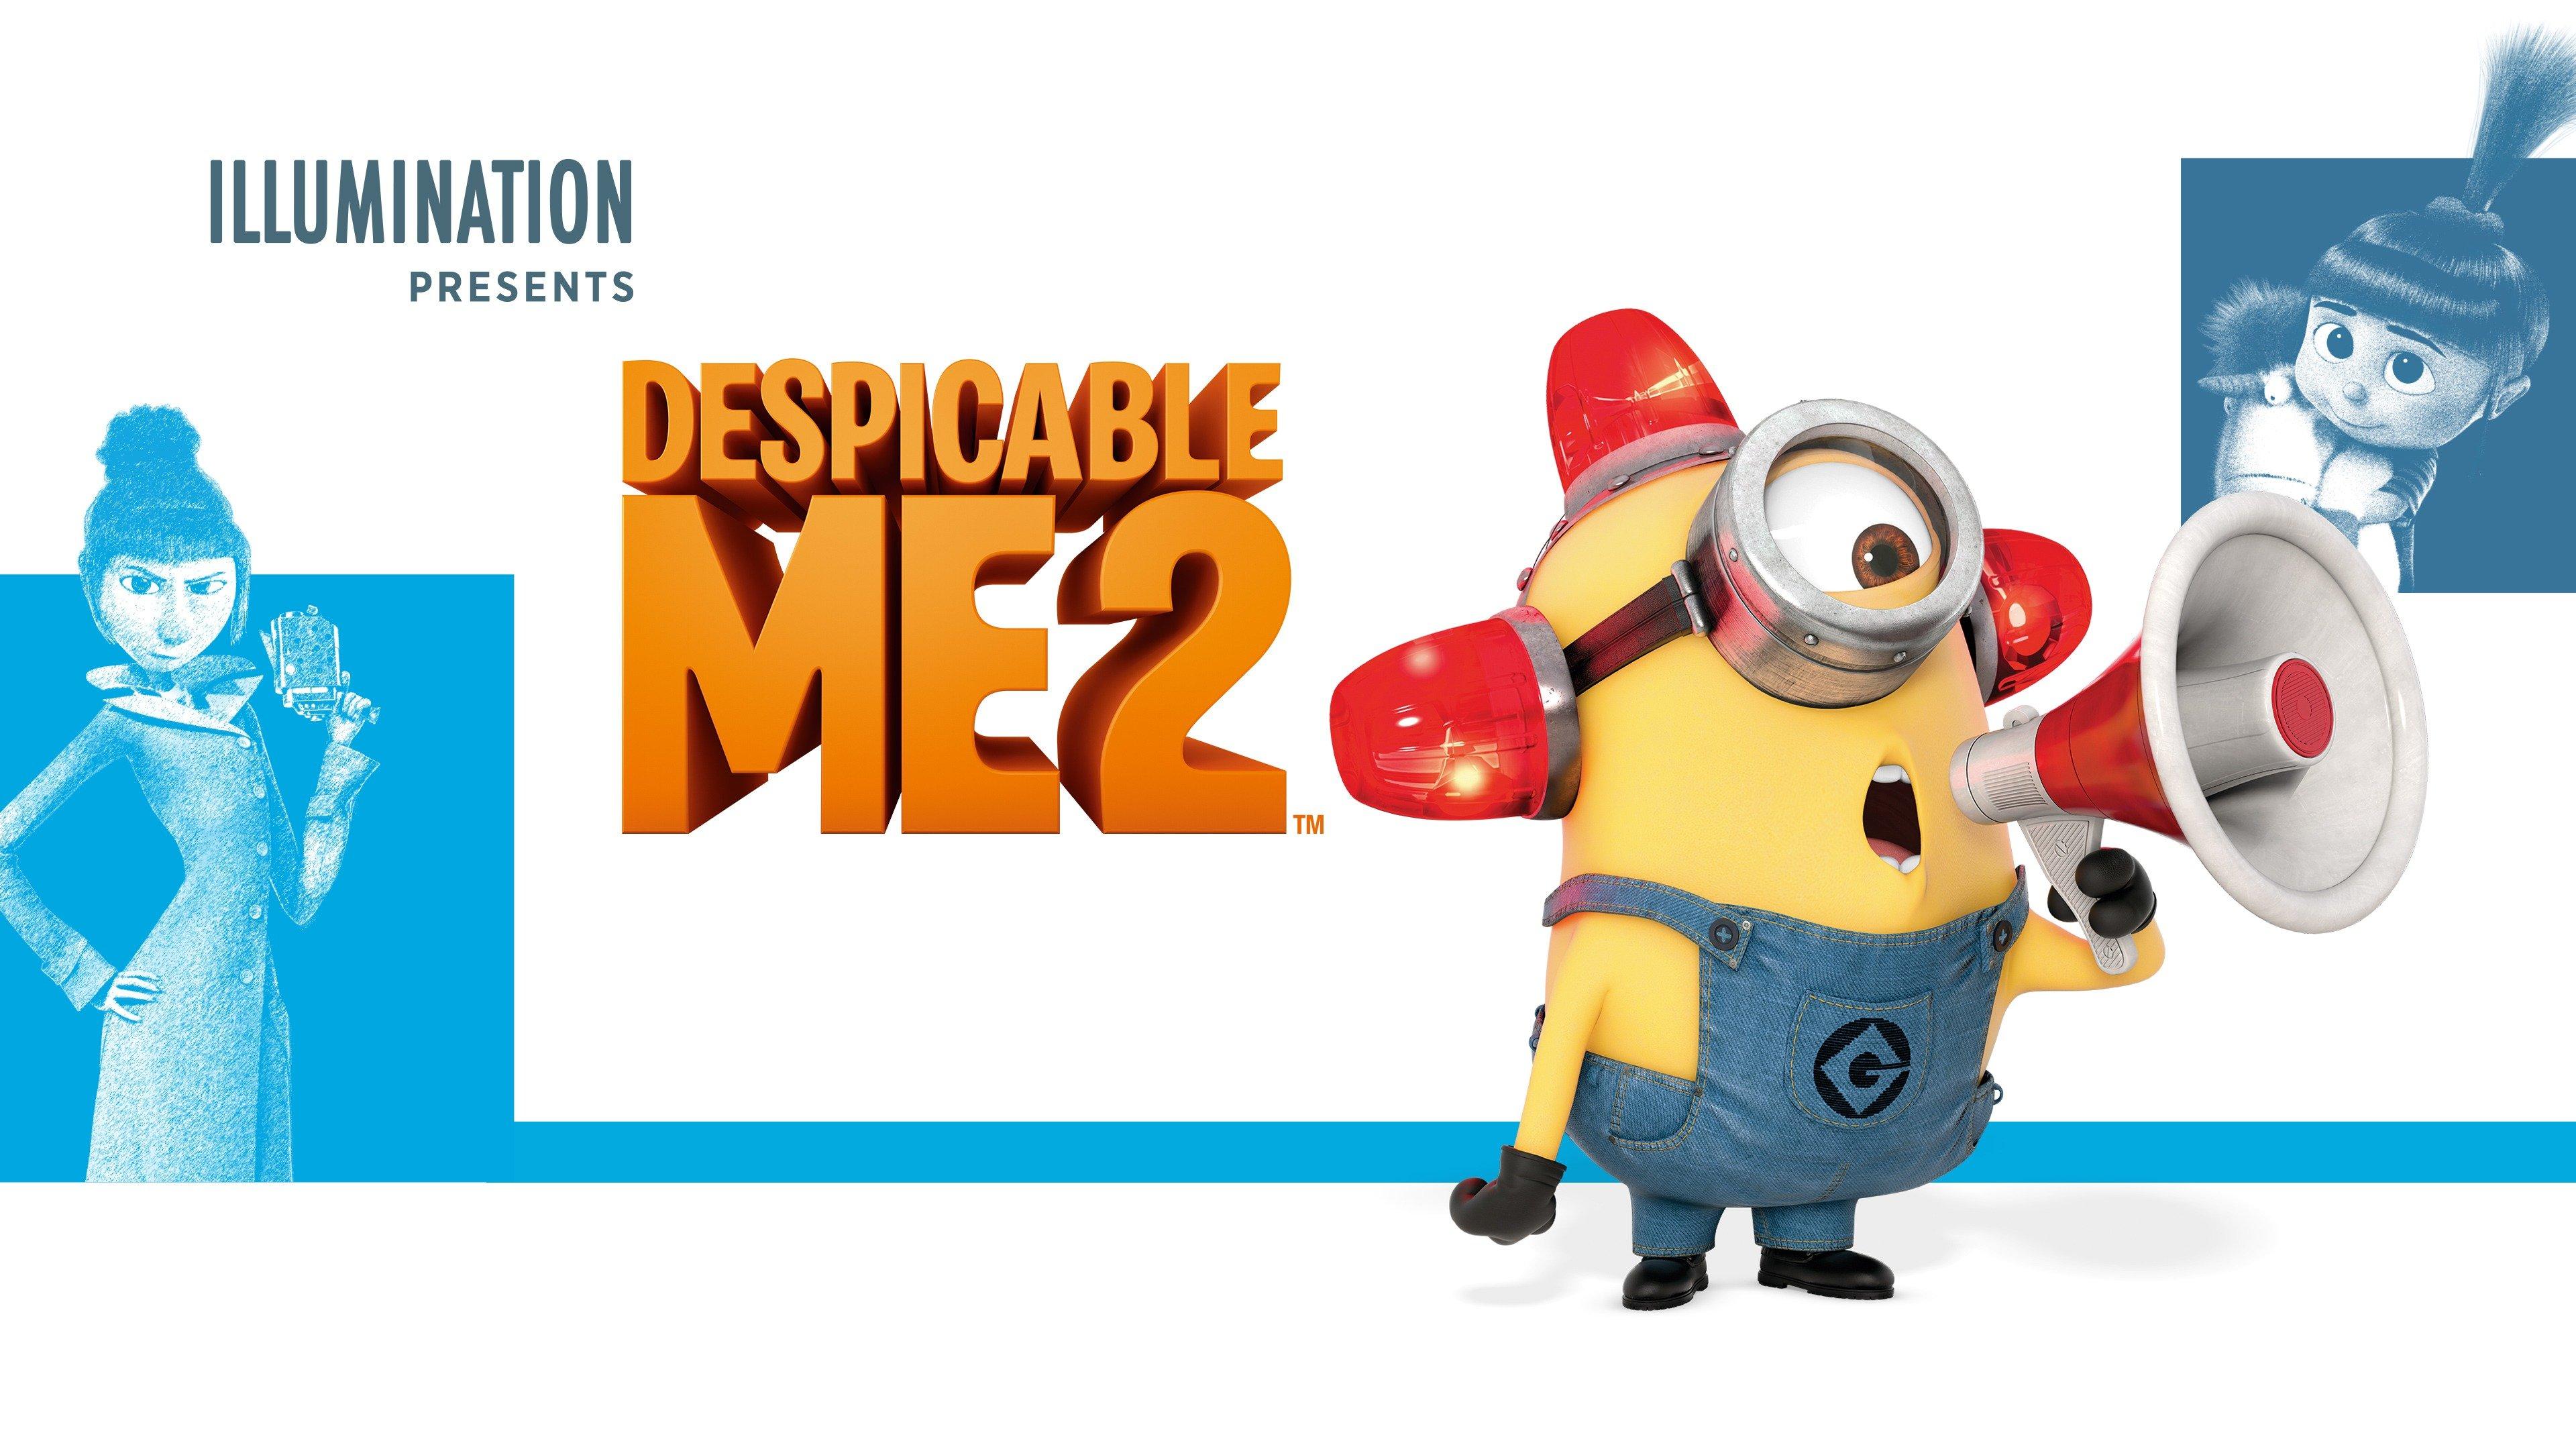 russell brand despicable me 2